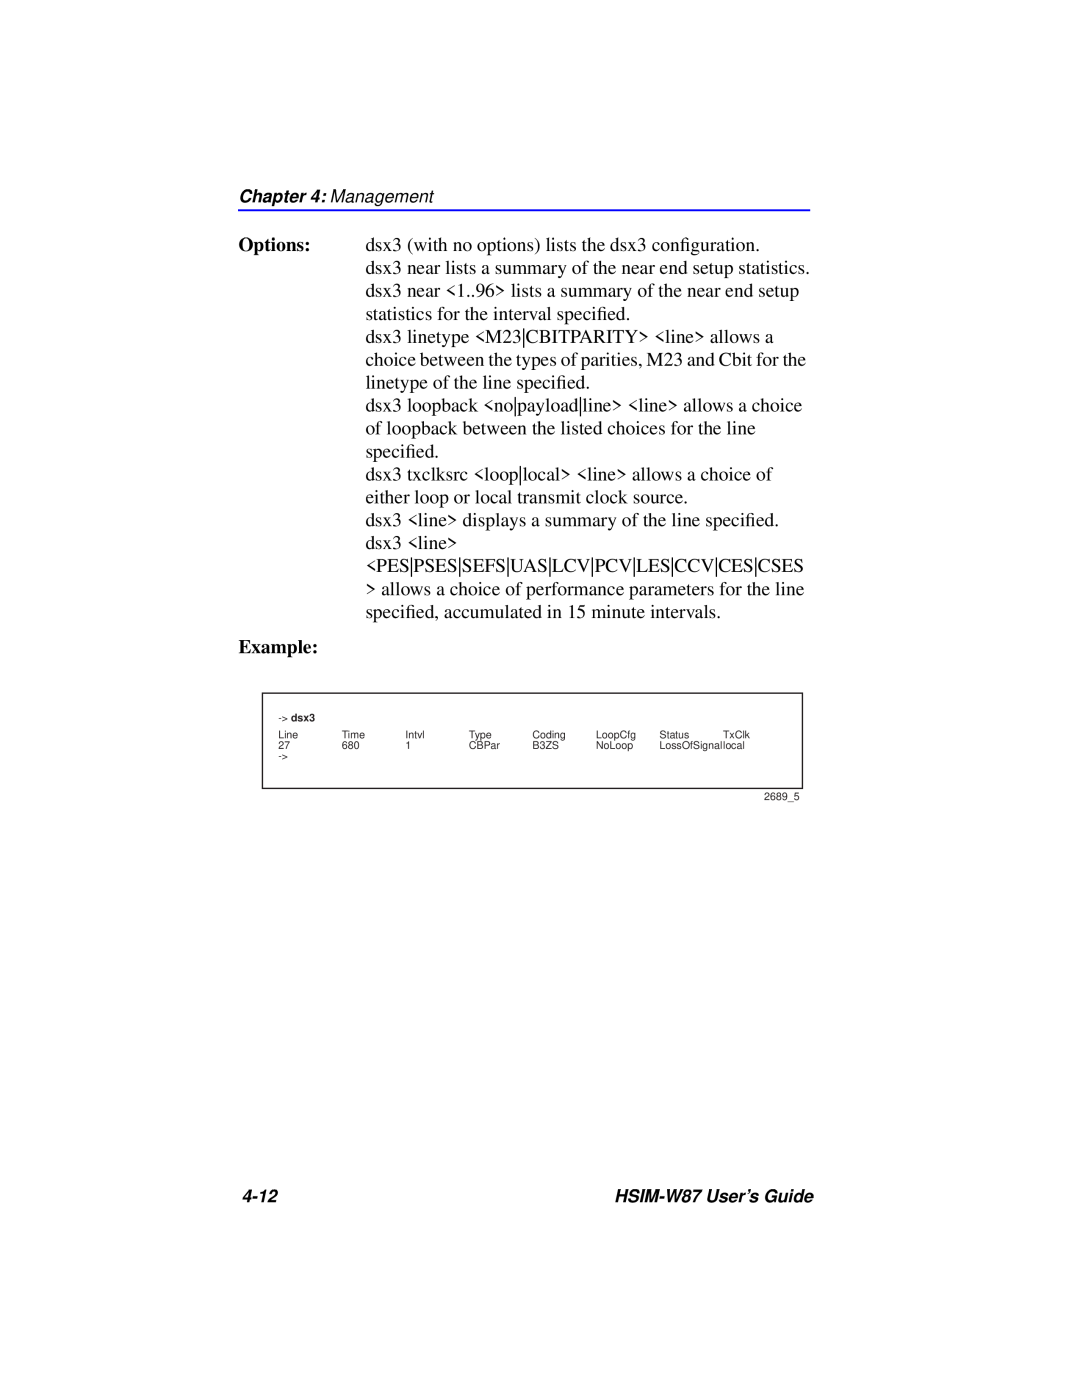 Cabletron Systems HSIM-W87 manual Example, dsx3 